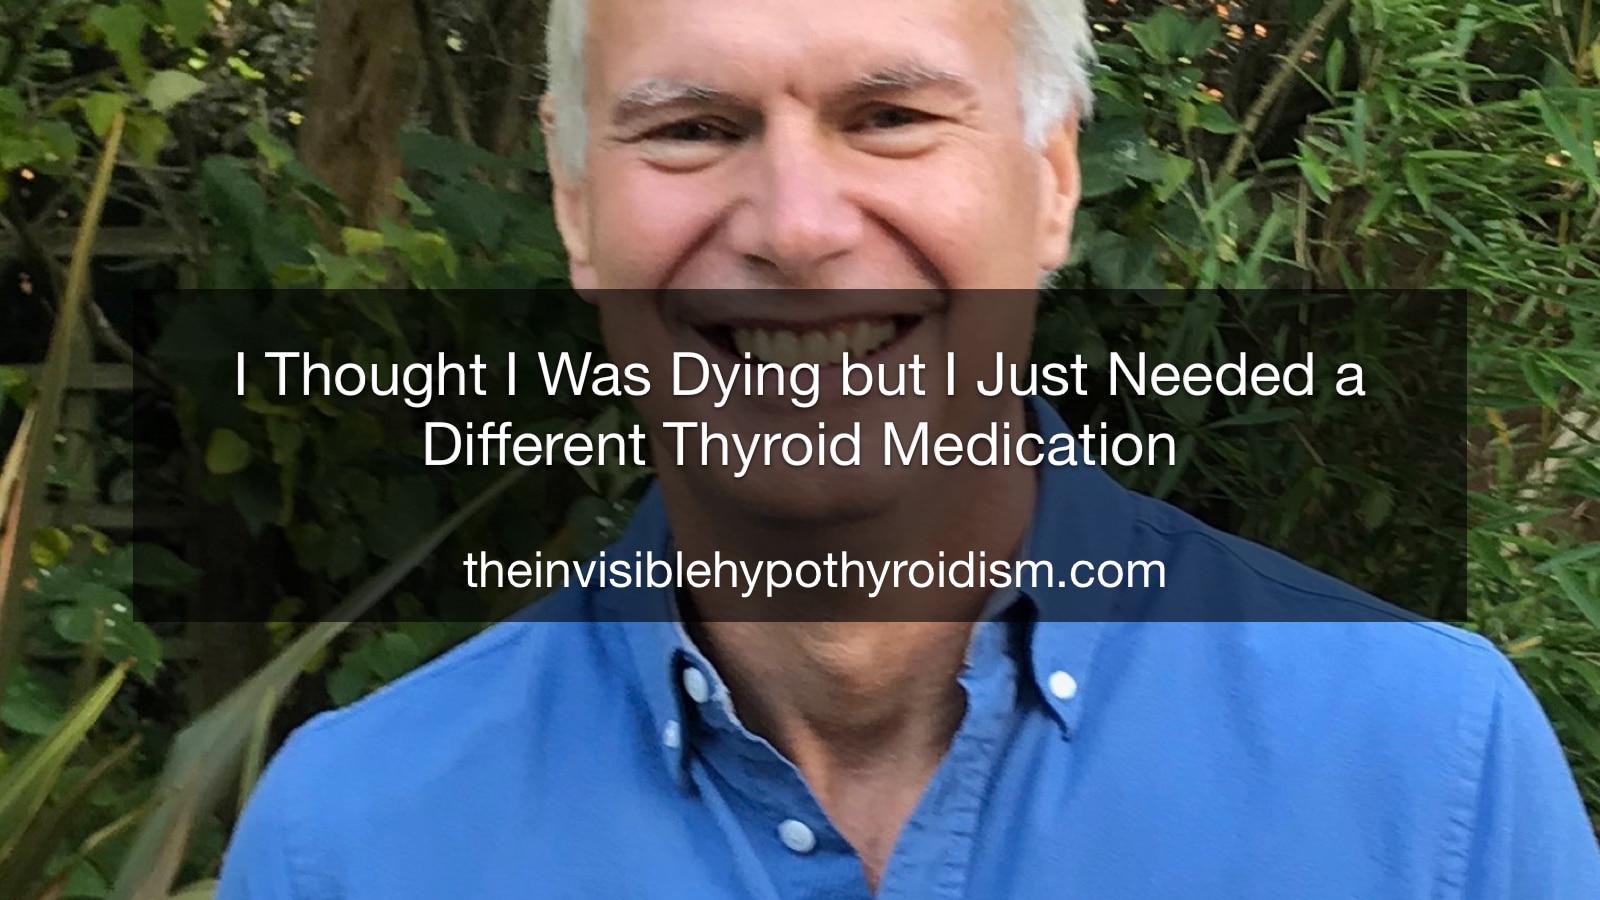 I Thought I Was Dying but I Just Needed a Different Thyroid Medication